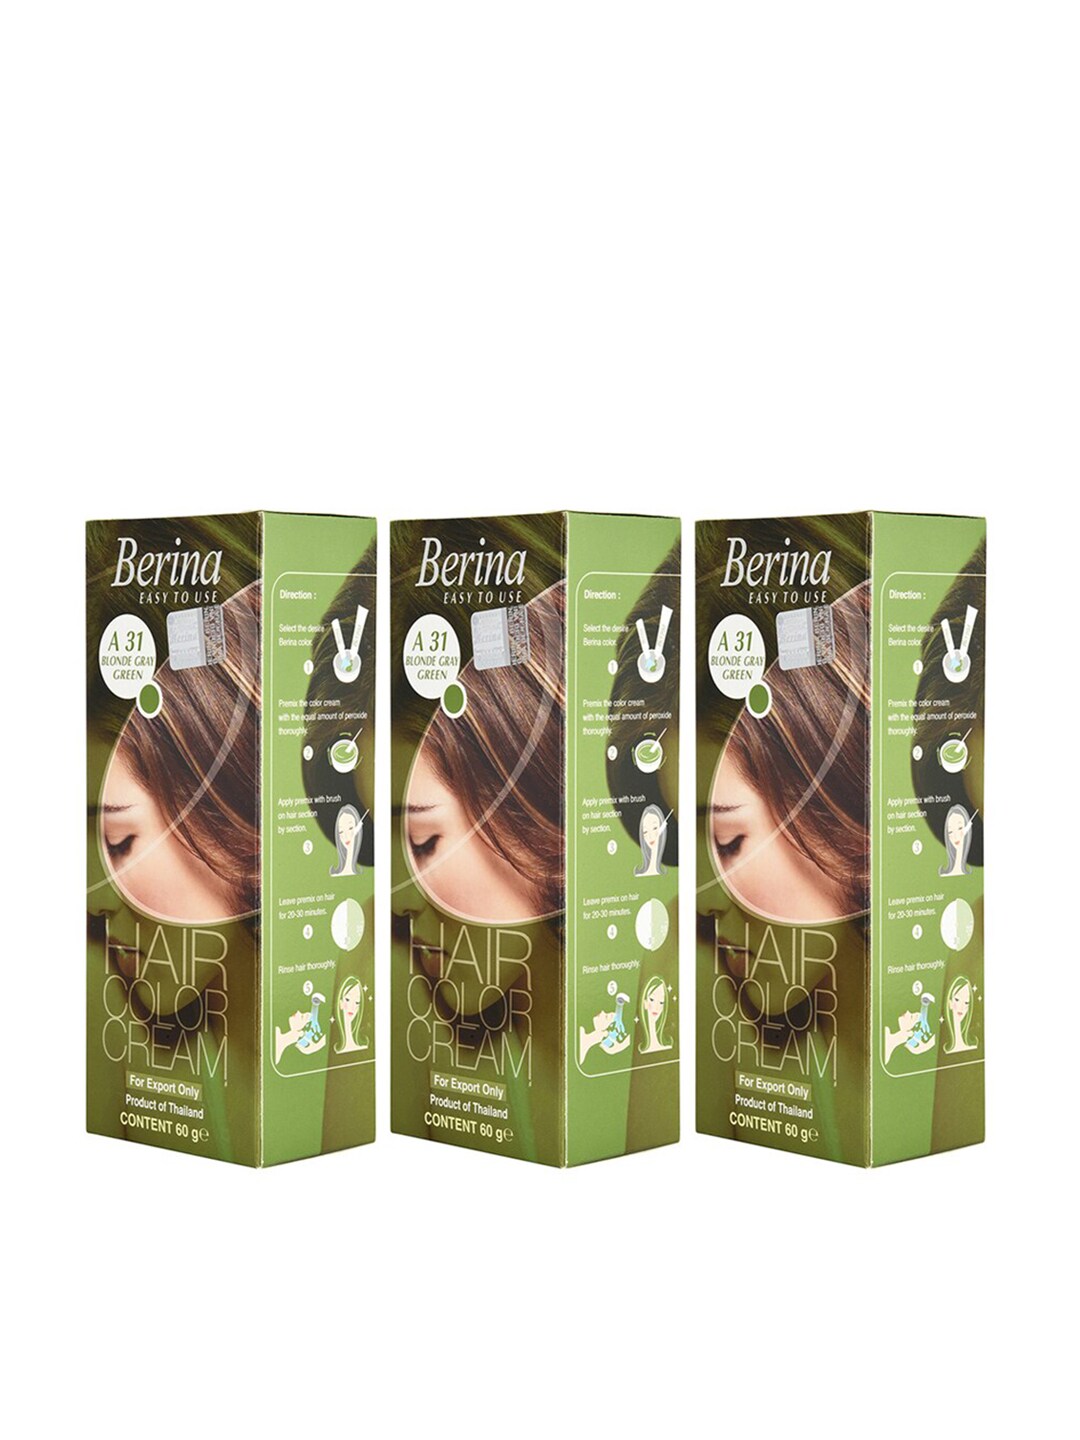 Berina Pack of 3 Hair Color Cream A31 Blonde Gray Green Price in India